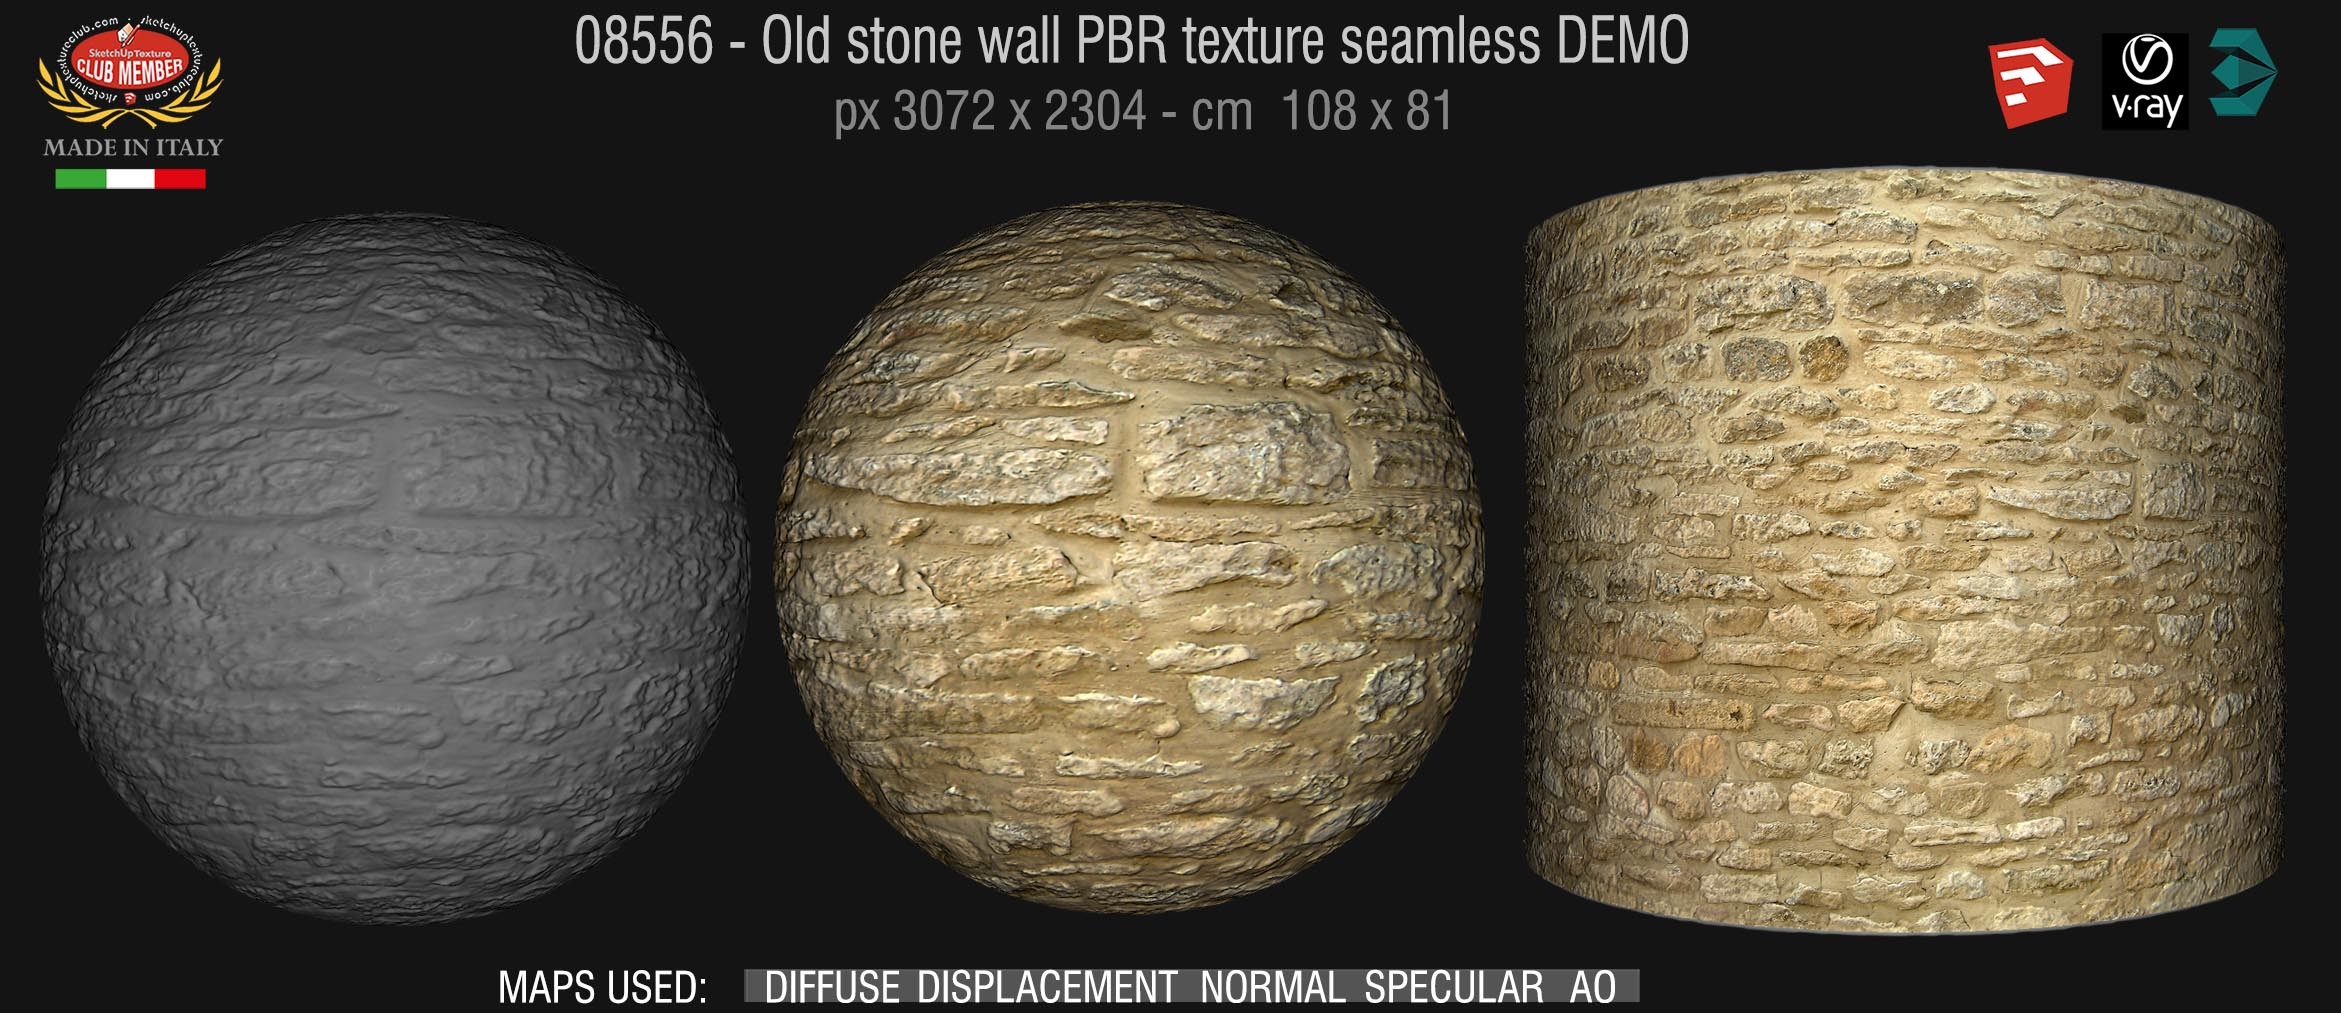 08556 Old stone wall PBR texture seamless DEMO